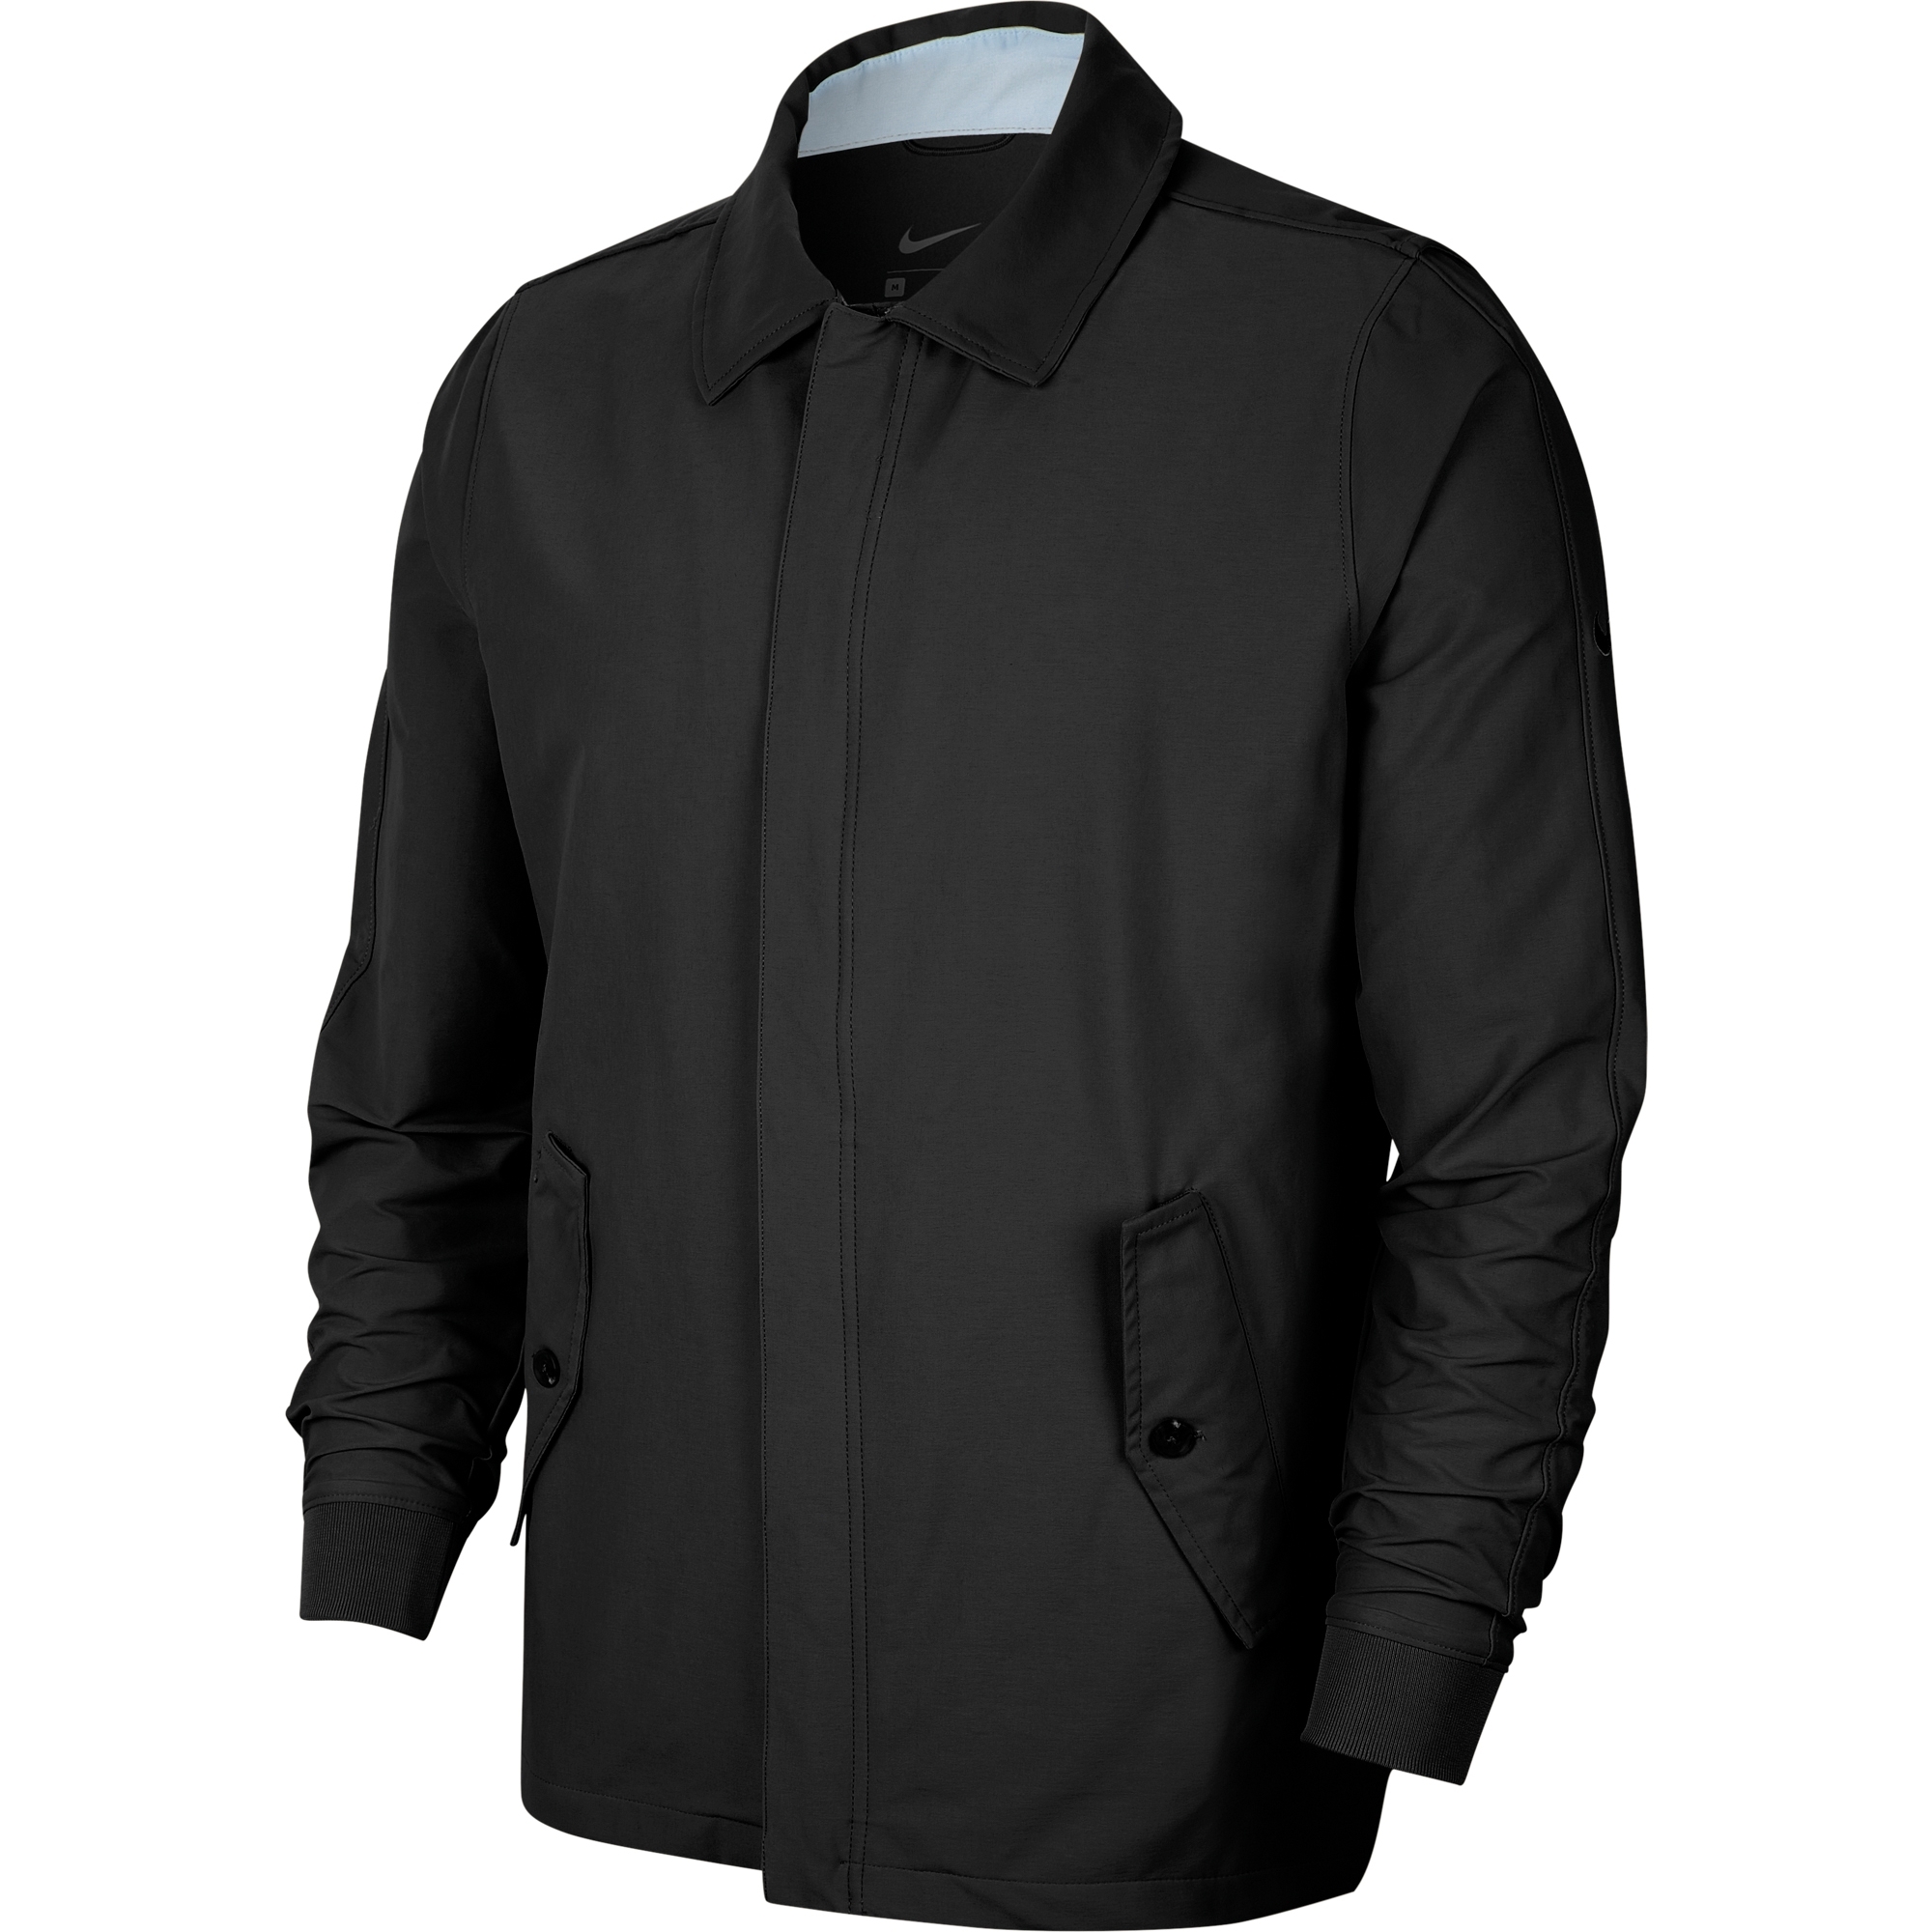 Nike Mens Repel Players Water Repellent Active Golf Jacket S- Chest 35-37.5’